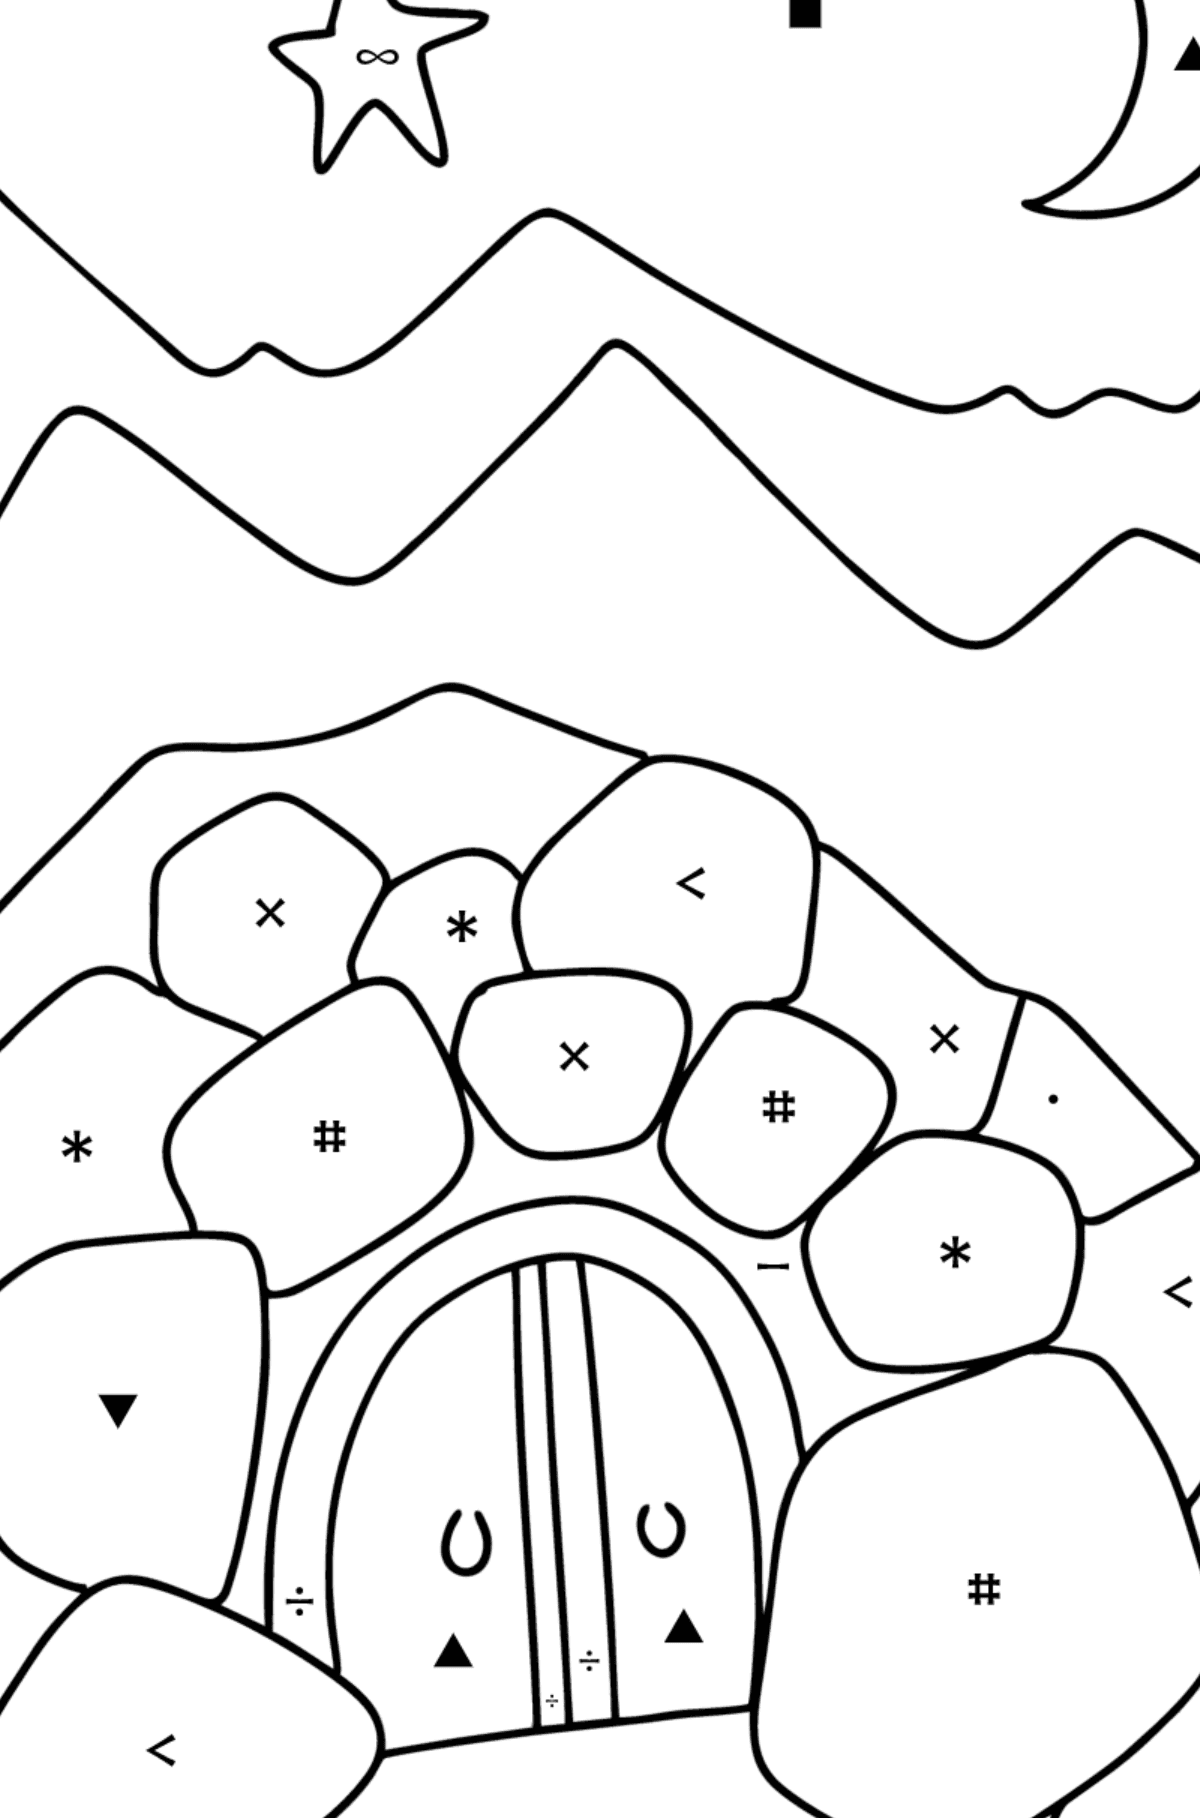 Ali Baba Cave coloring page - Coloring by Symbols for Kids